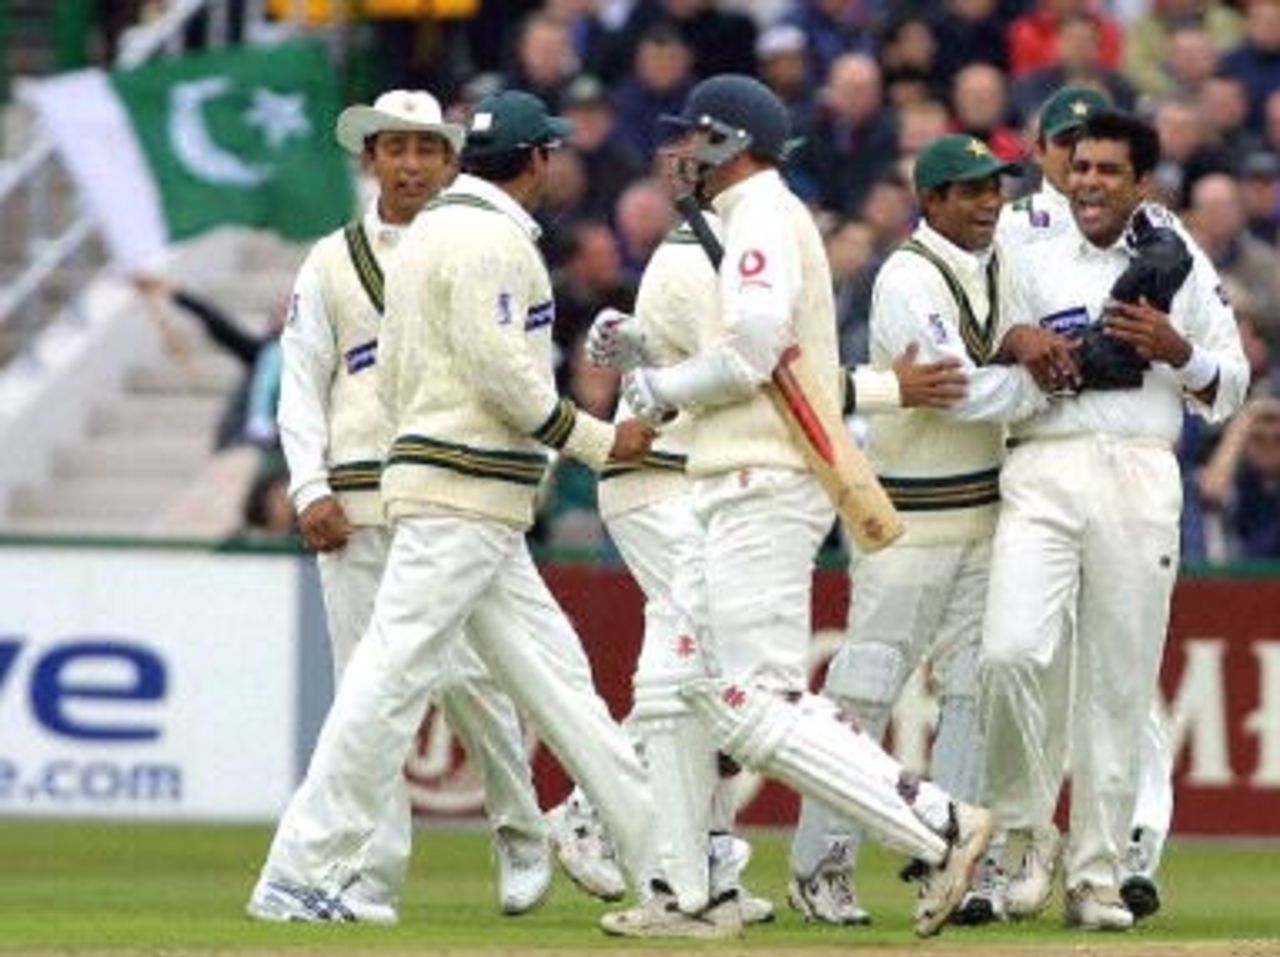 Waqar Younis and teammates celebrate the dismissal of Atherton,day 2, 2nd Test at Old Trafford, 17-21 May 2001.